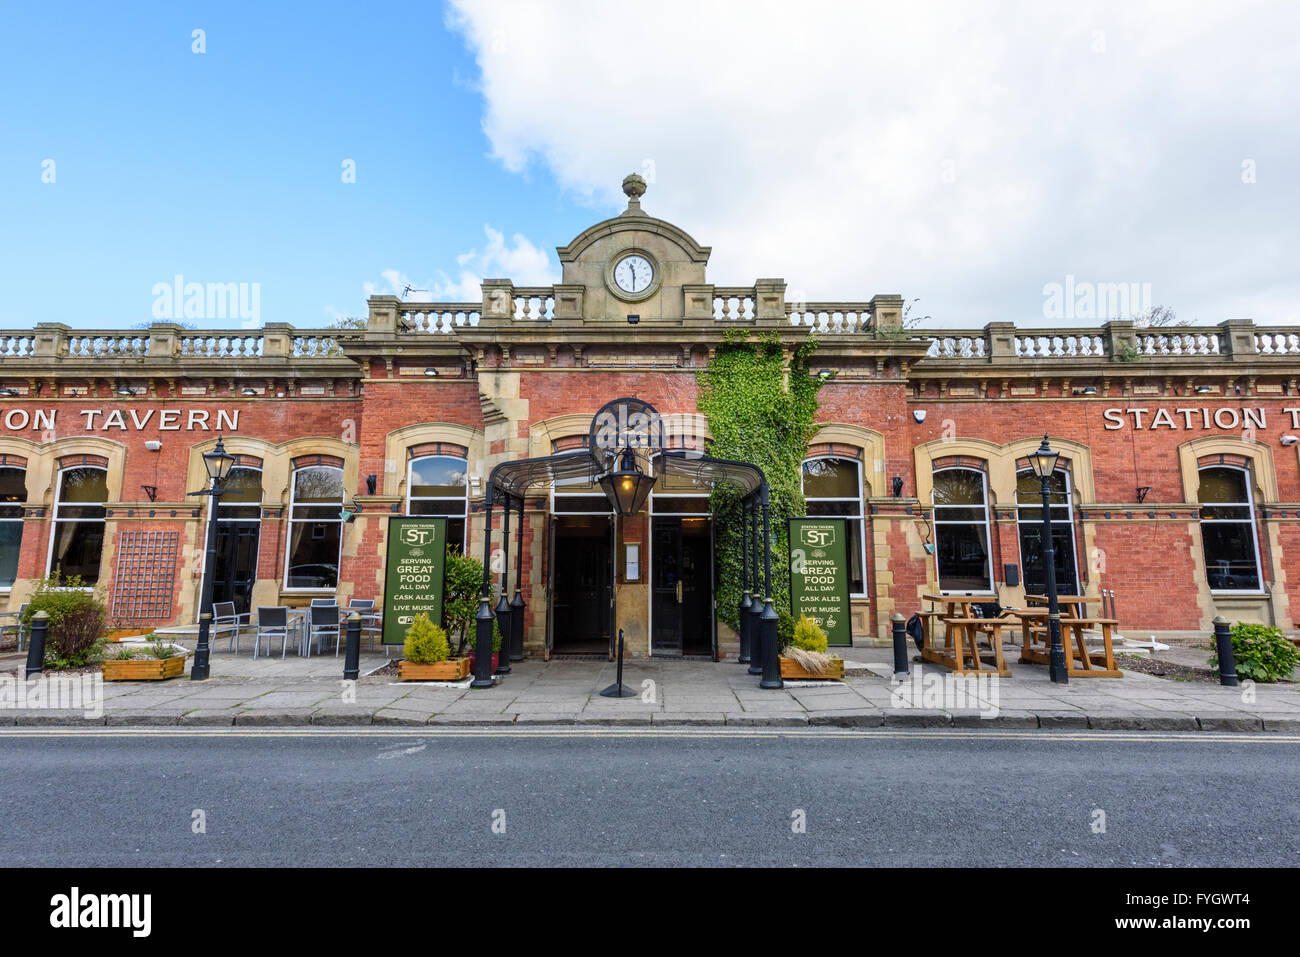 View of the front of the old railway station building in Lytham, Lancashire converted into a restaurant and bar Stock Photo